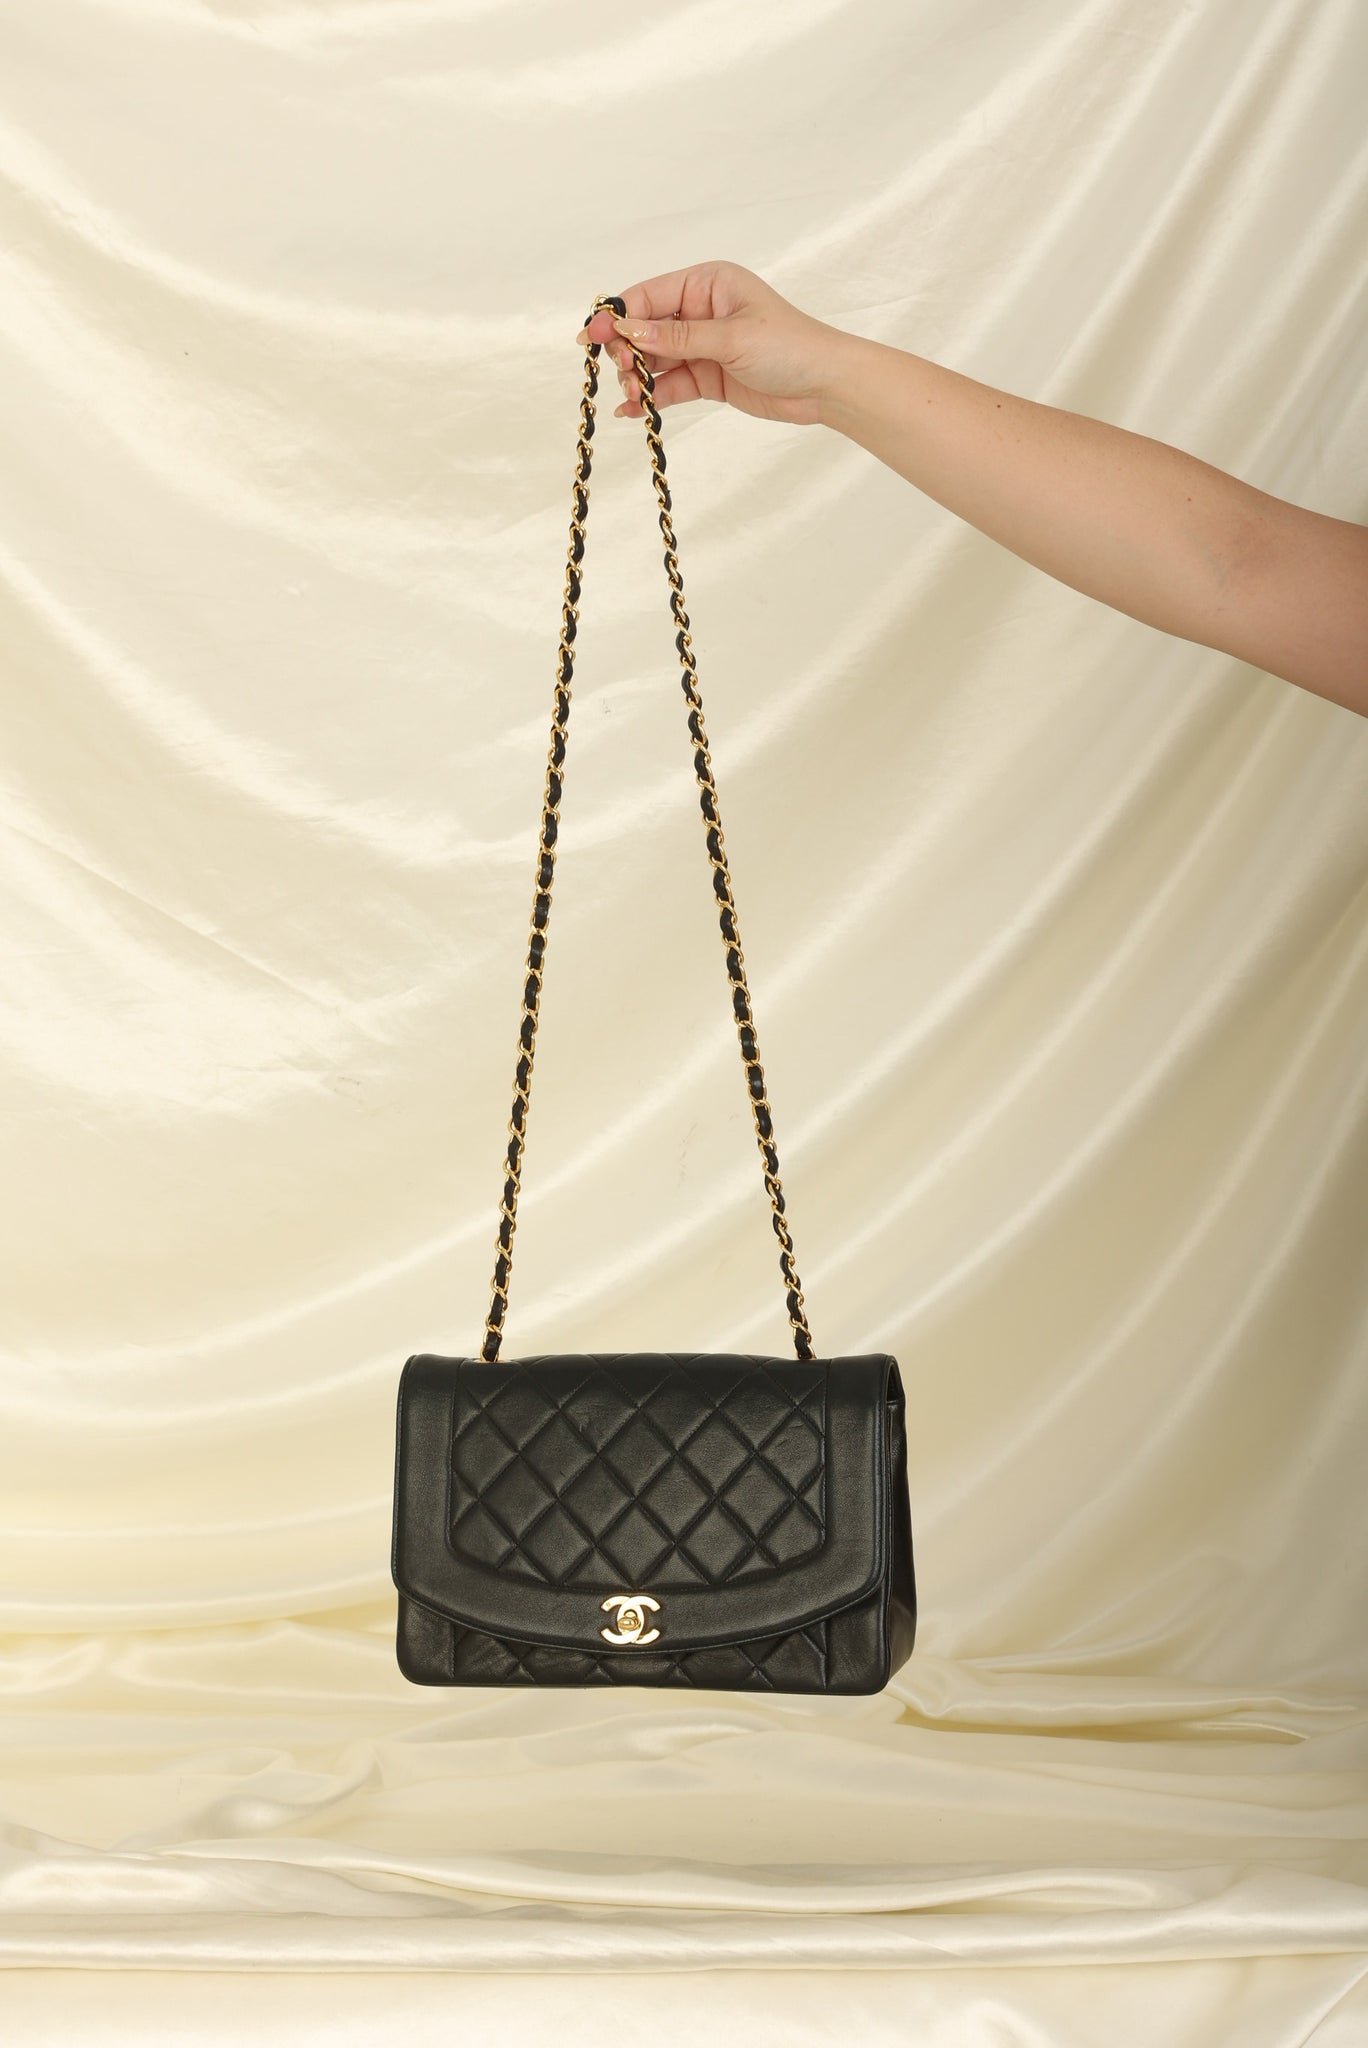 chanel owned by